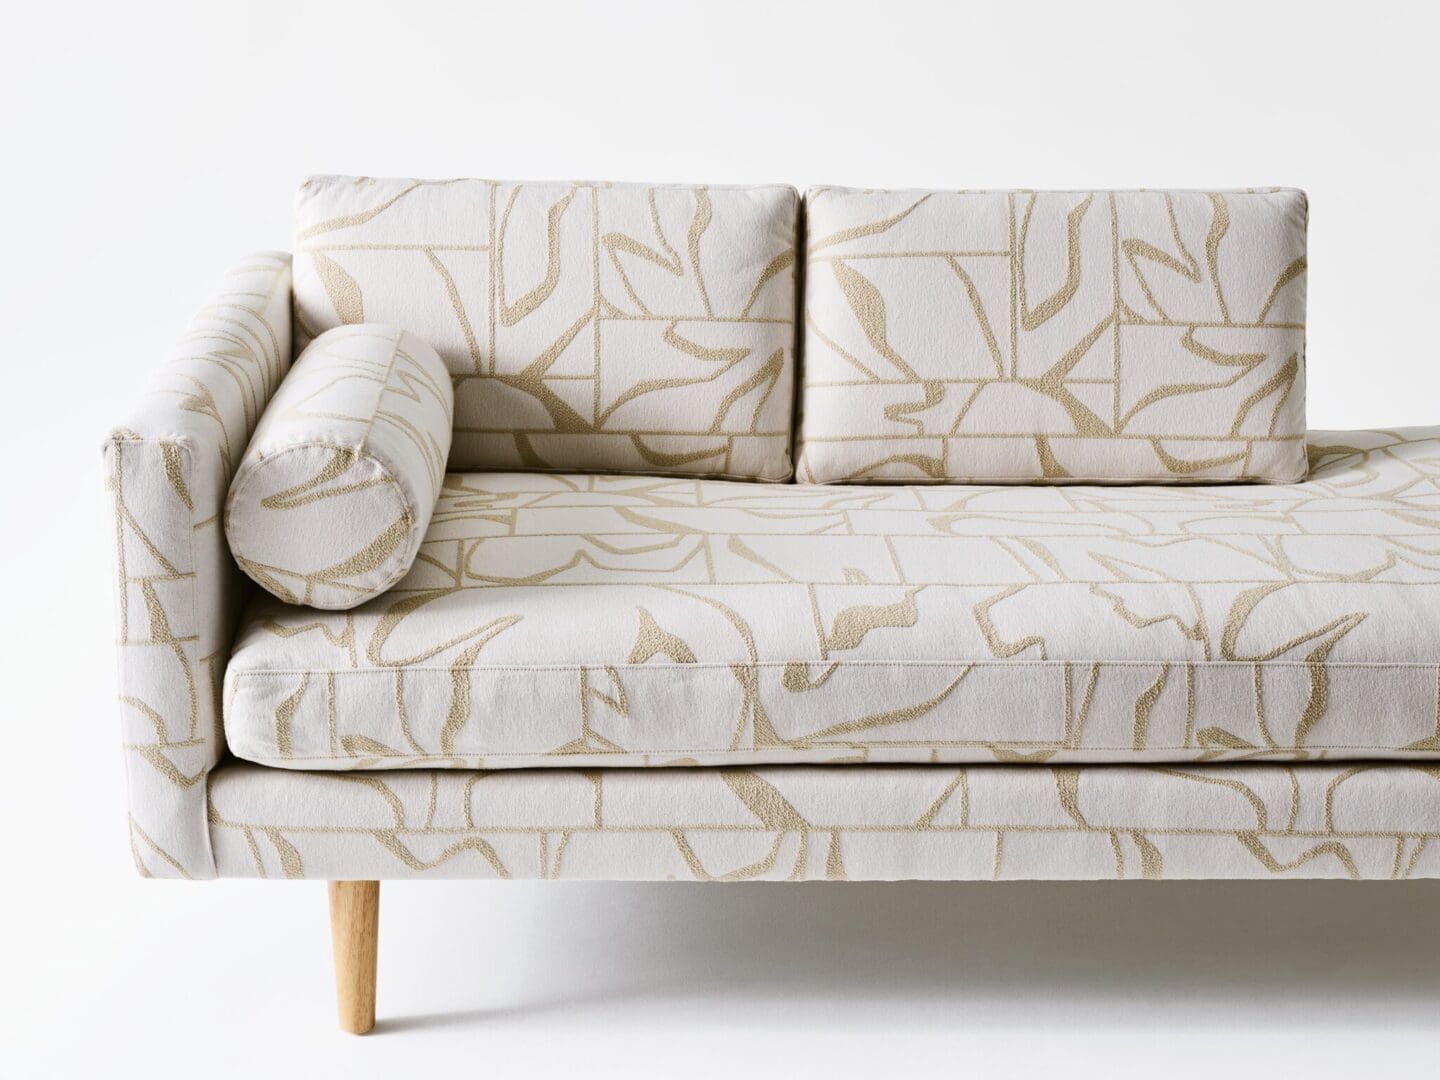 A couch with a floral pattern on it